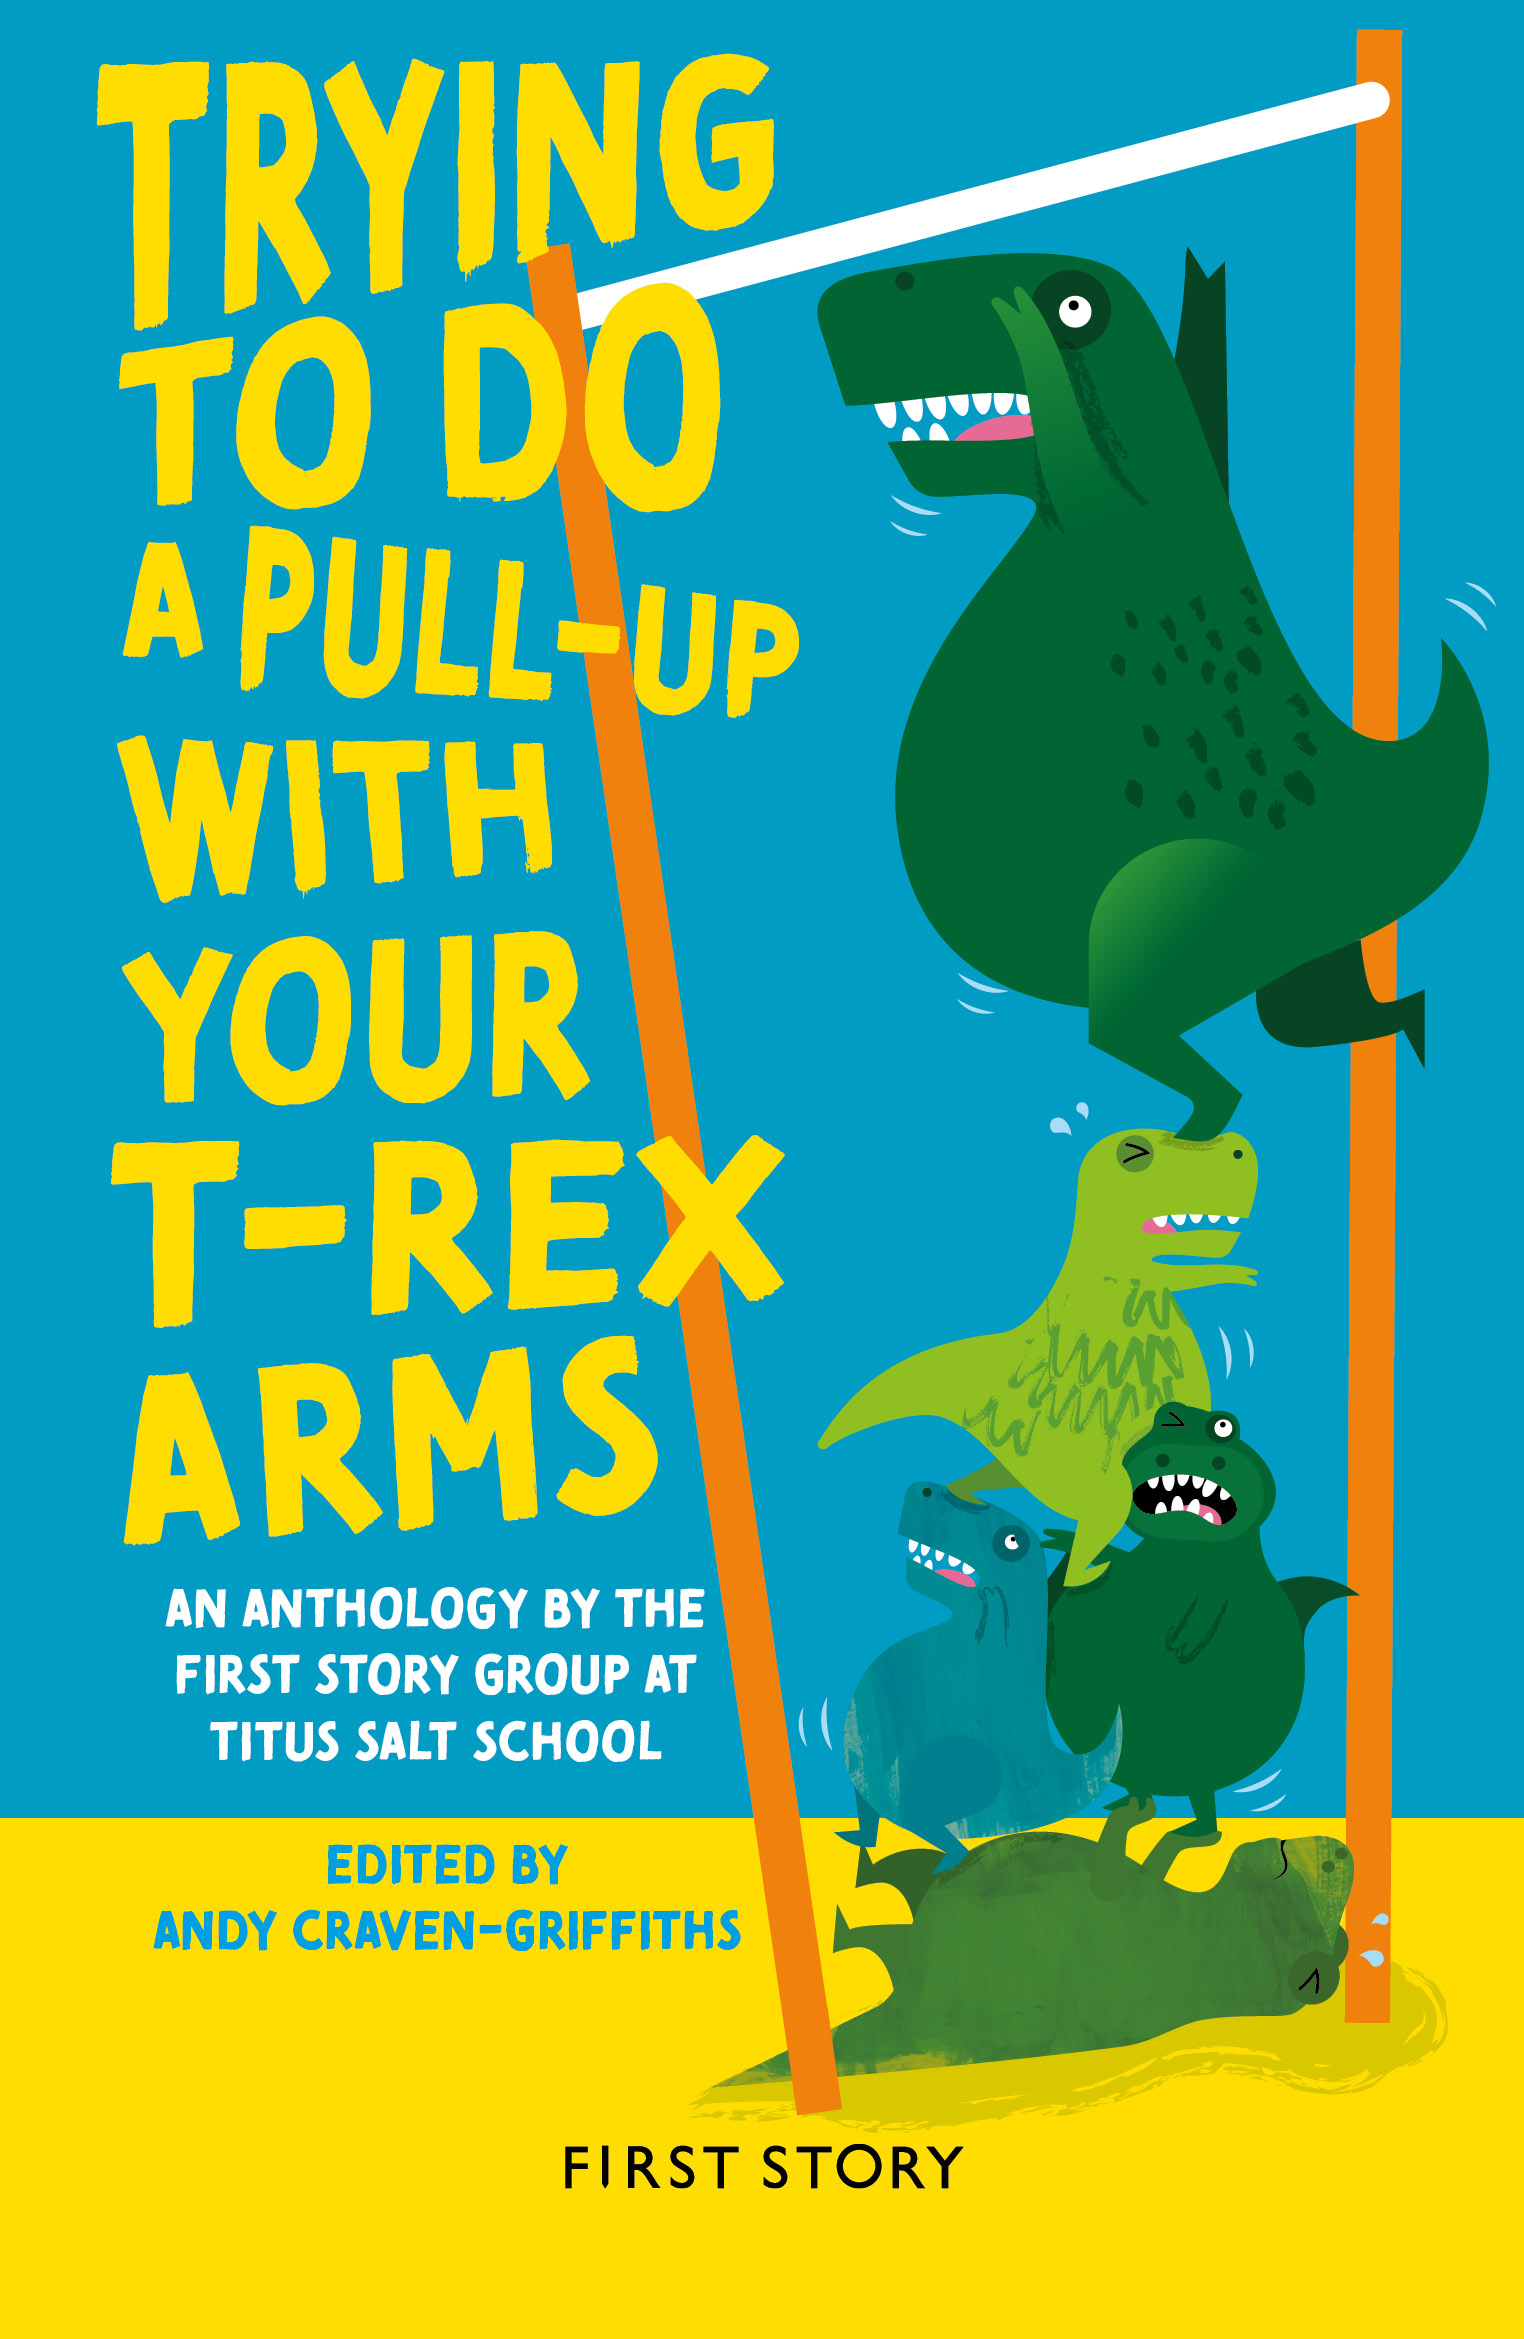 Cover of First Story Anthology for Titus Salt School, titled Trying To Do A Pull-Up With Your T-Rex Arms